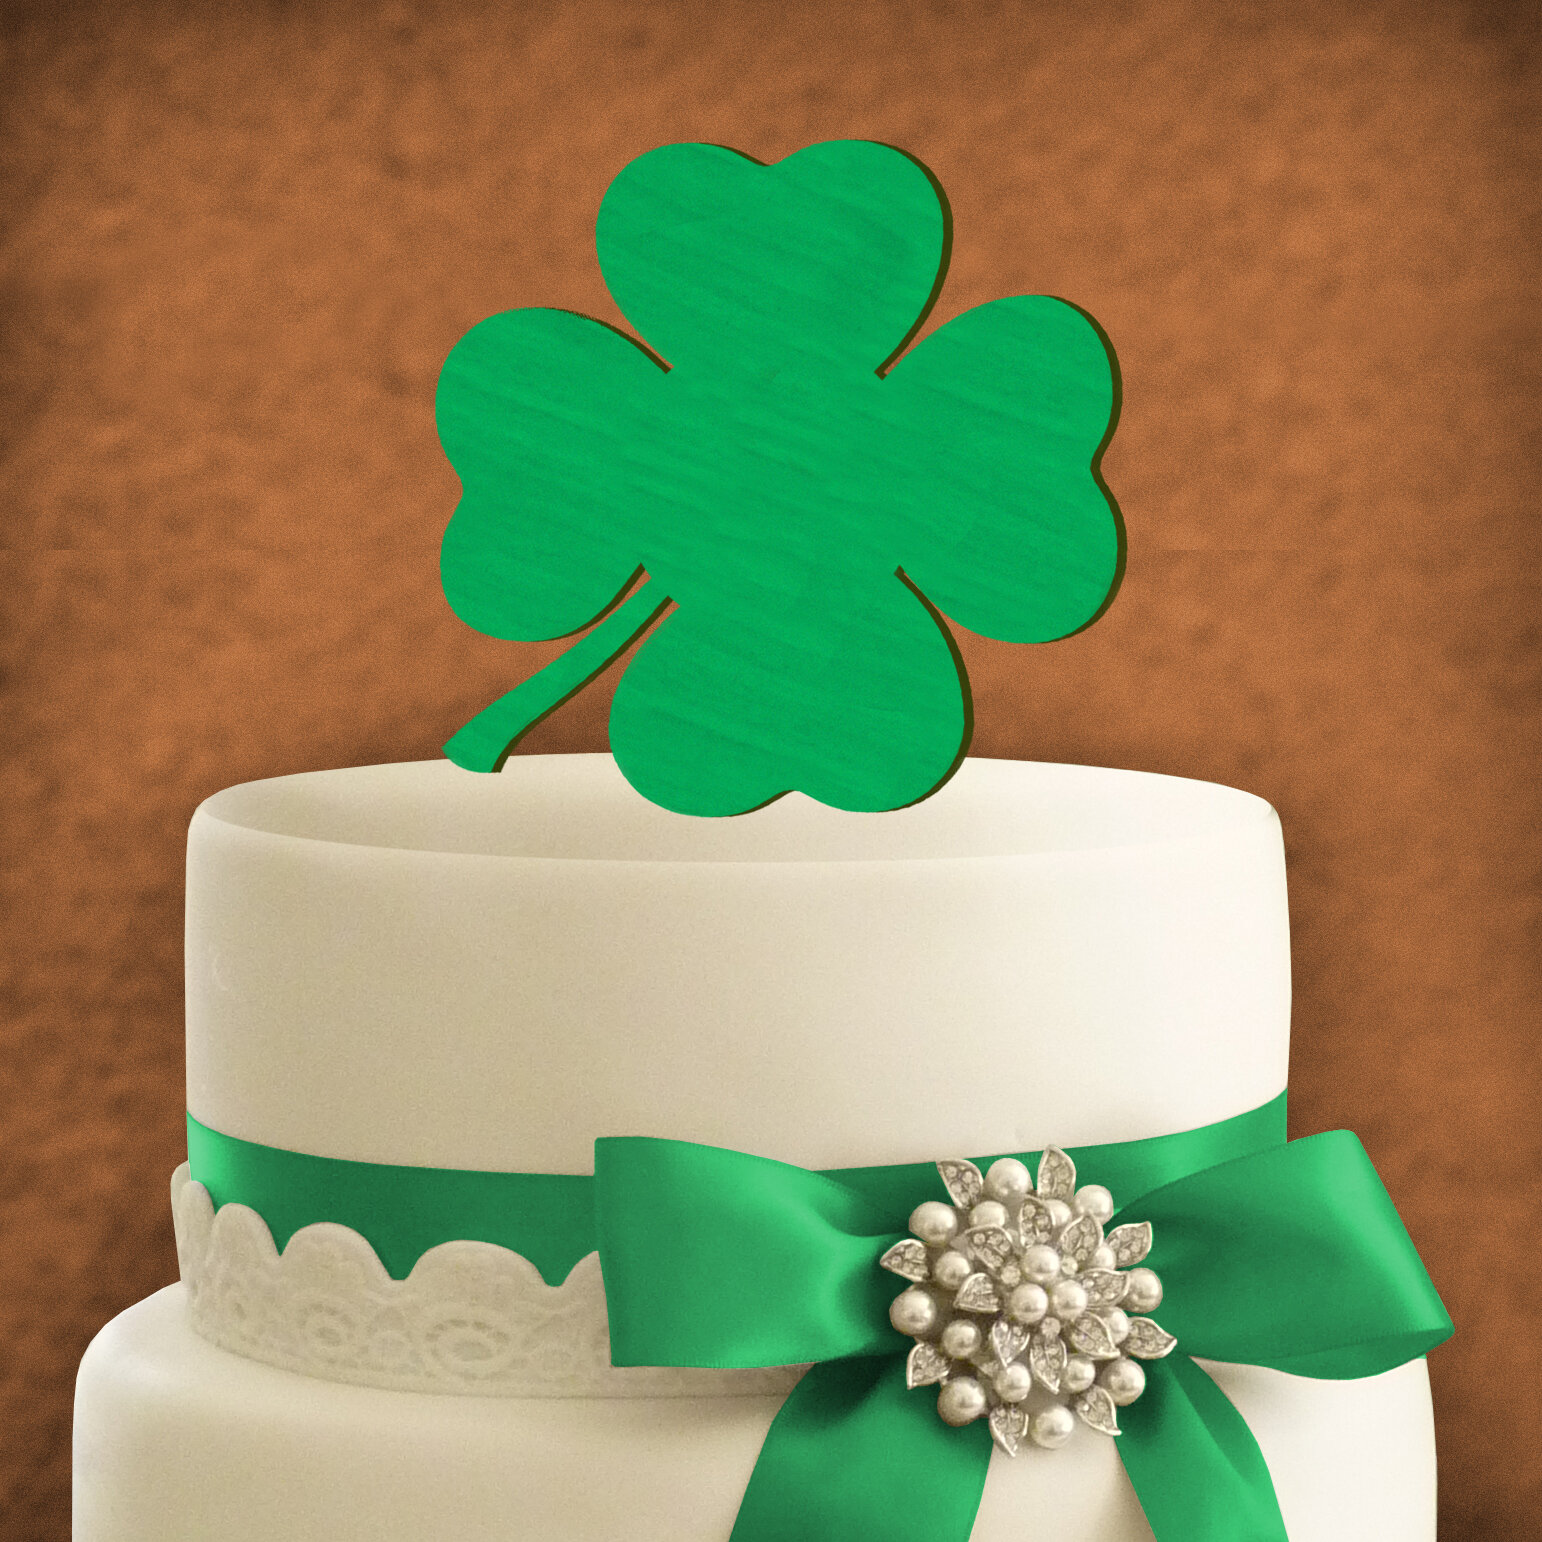 Clover Cake Decorating Metal 188 by Framar Cutters 